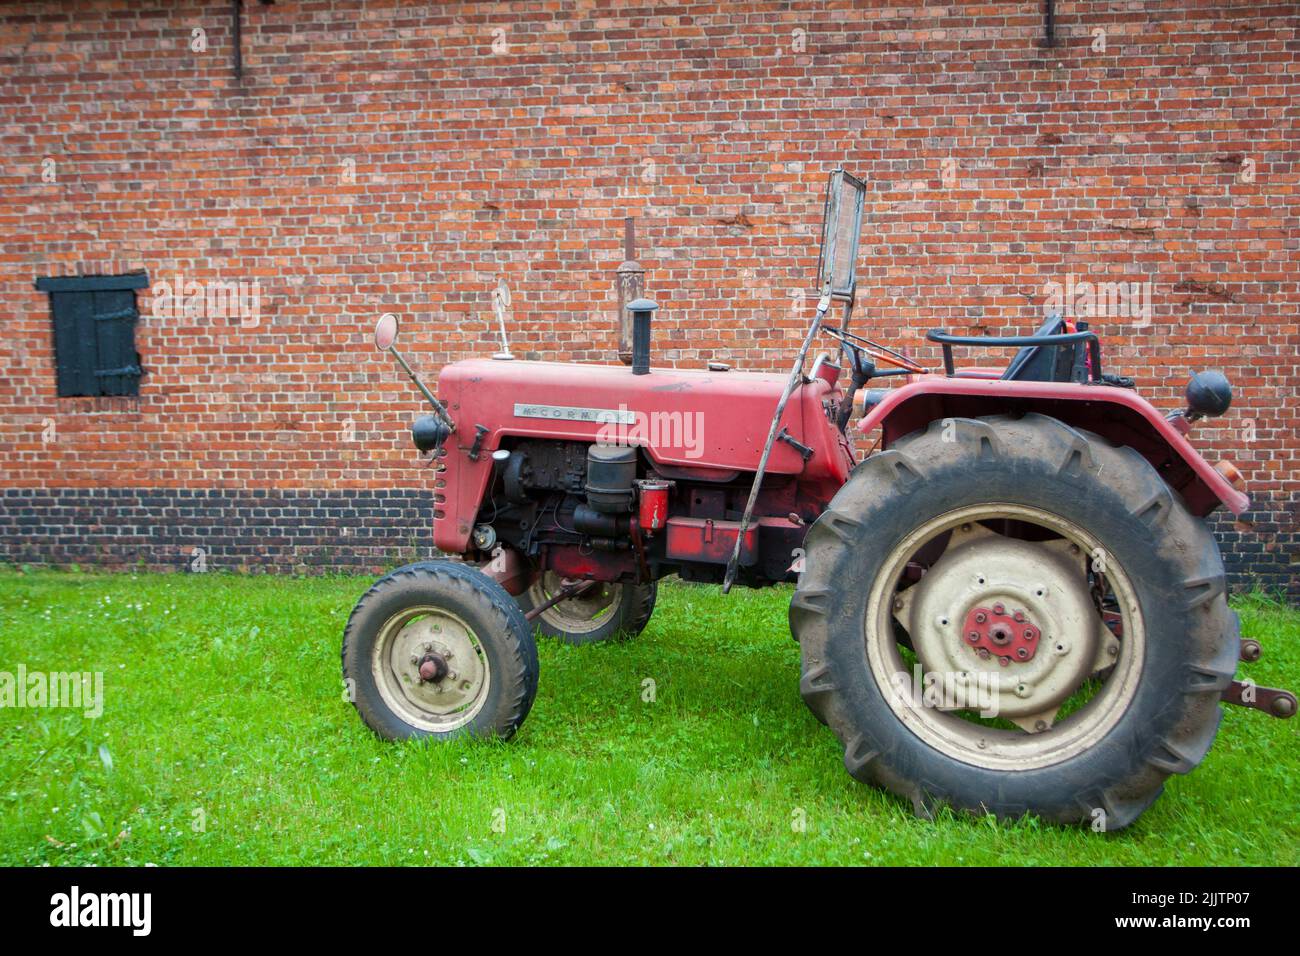 Hoogstraten, Belgium, 22nd June 2013, A vintage McCormick Deering tractor on display at a farm. High quality photo Stock Photo